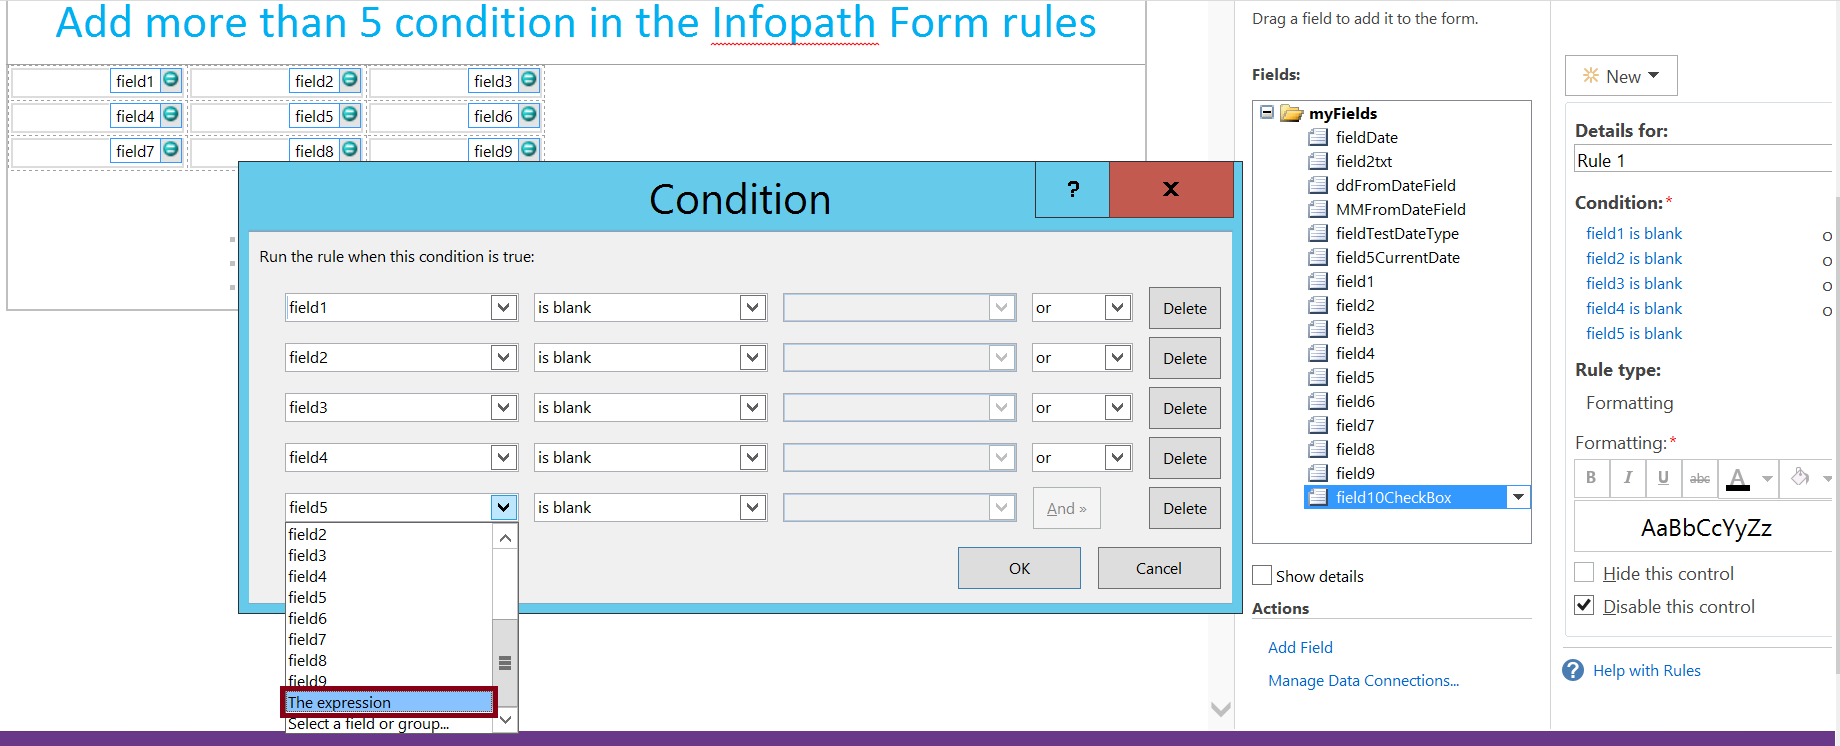 Add more than five conditions in the Infopath form rule - The expression